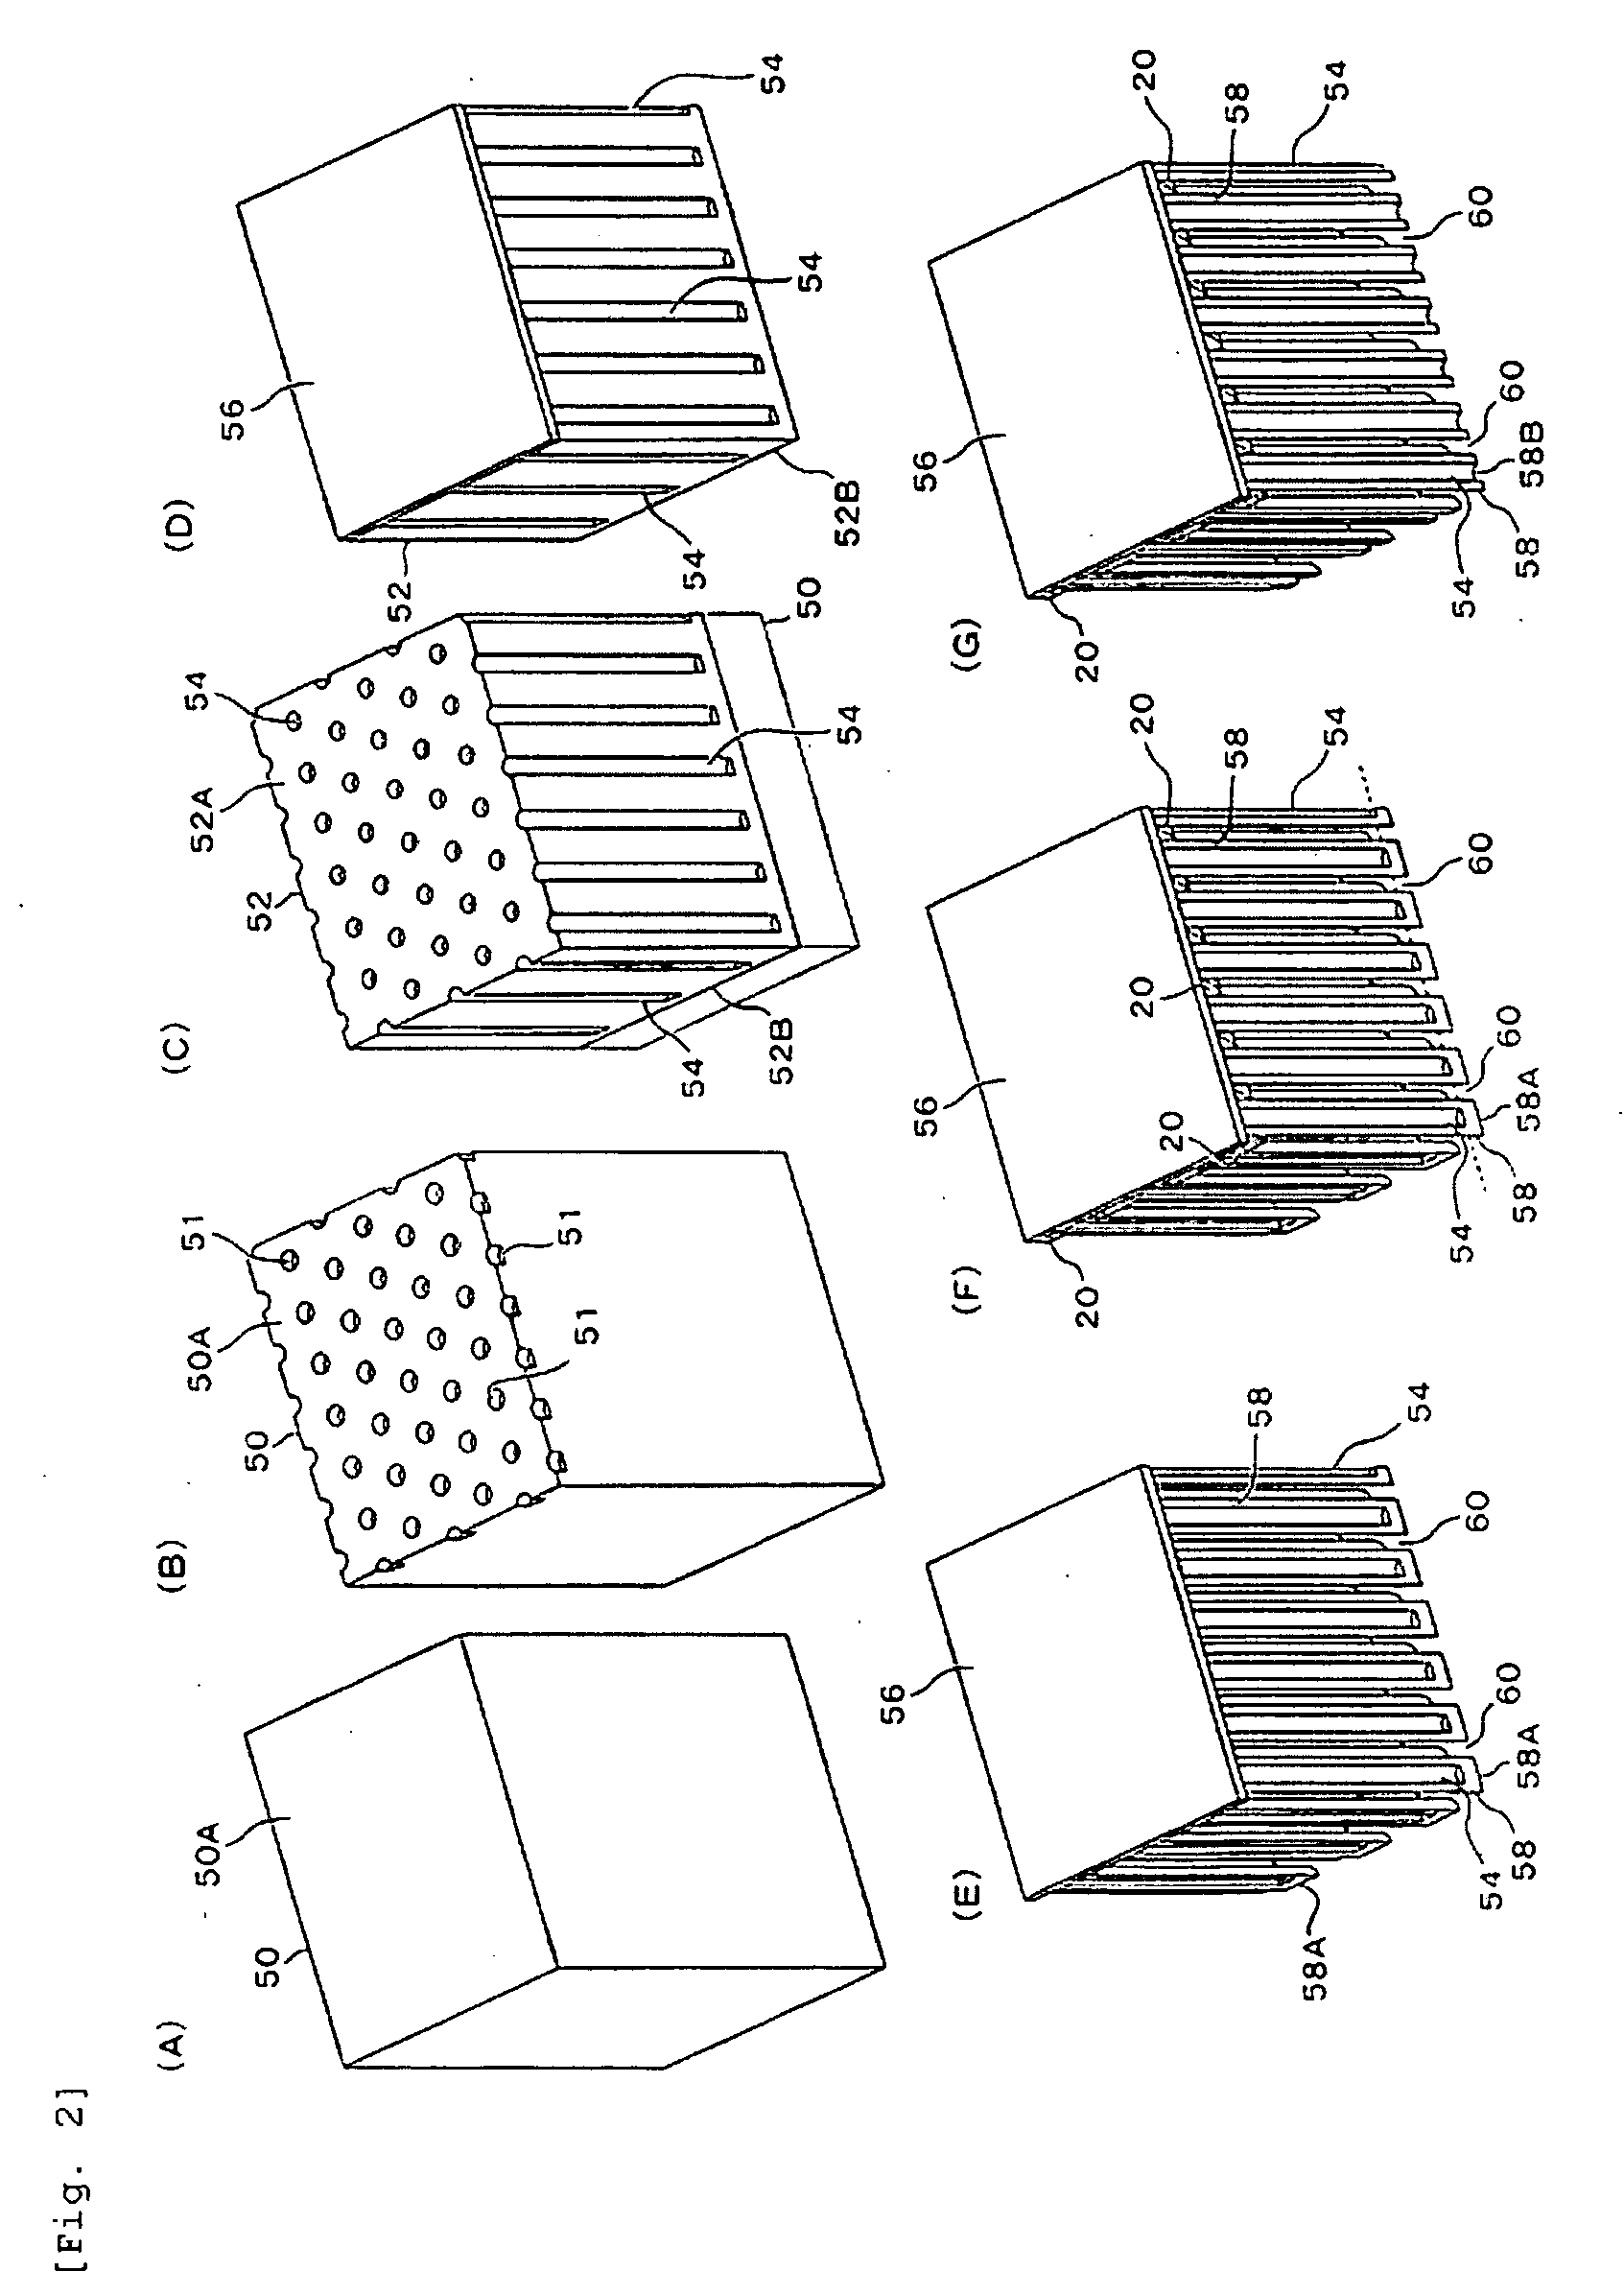 Capacitor having microstructures